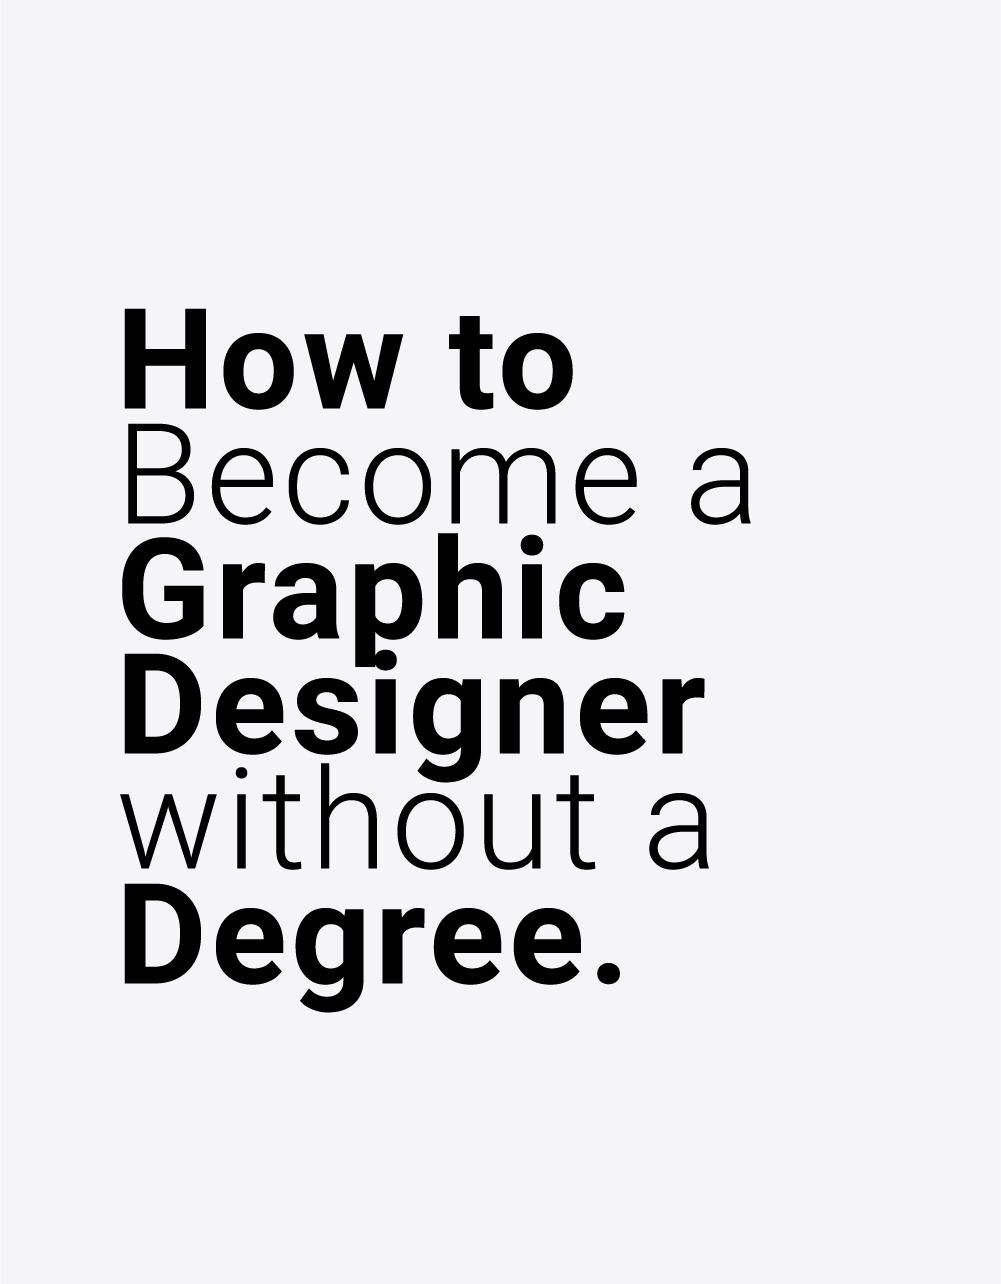 this phrase: How to Become a Graphic Designer without a Degree. in black color within a white background.